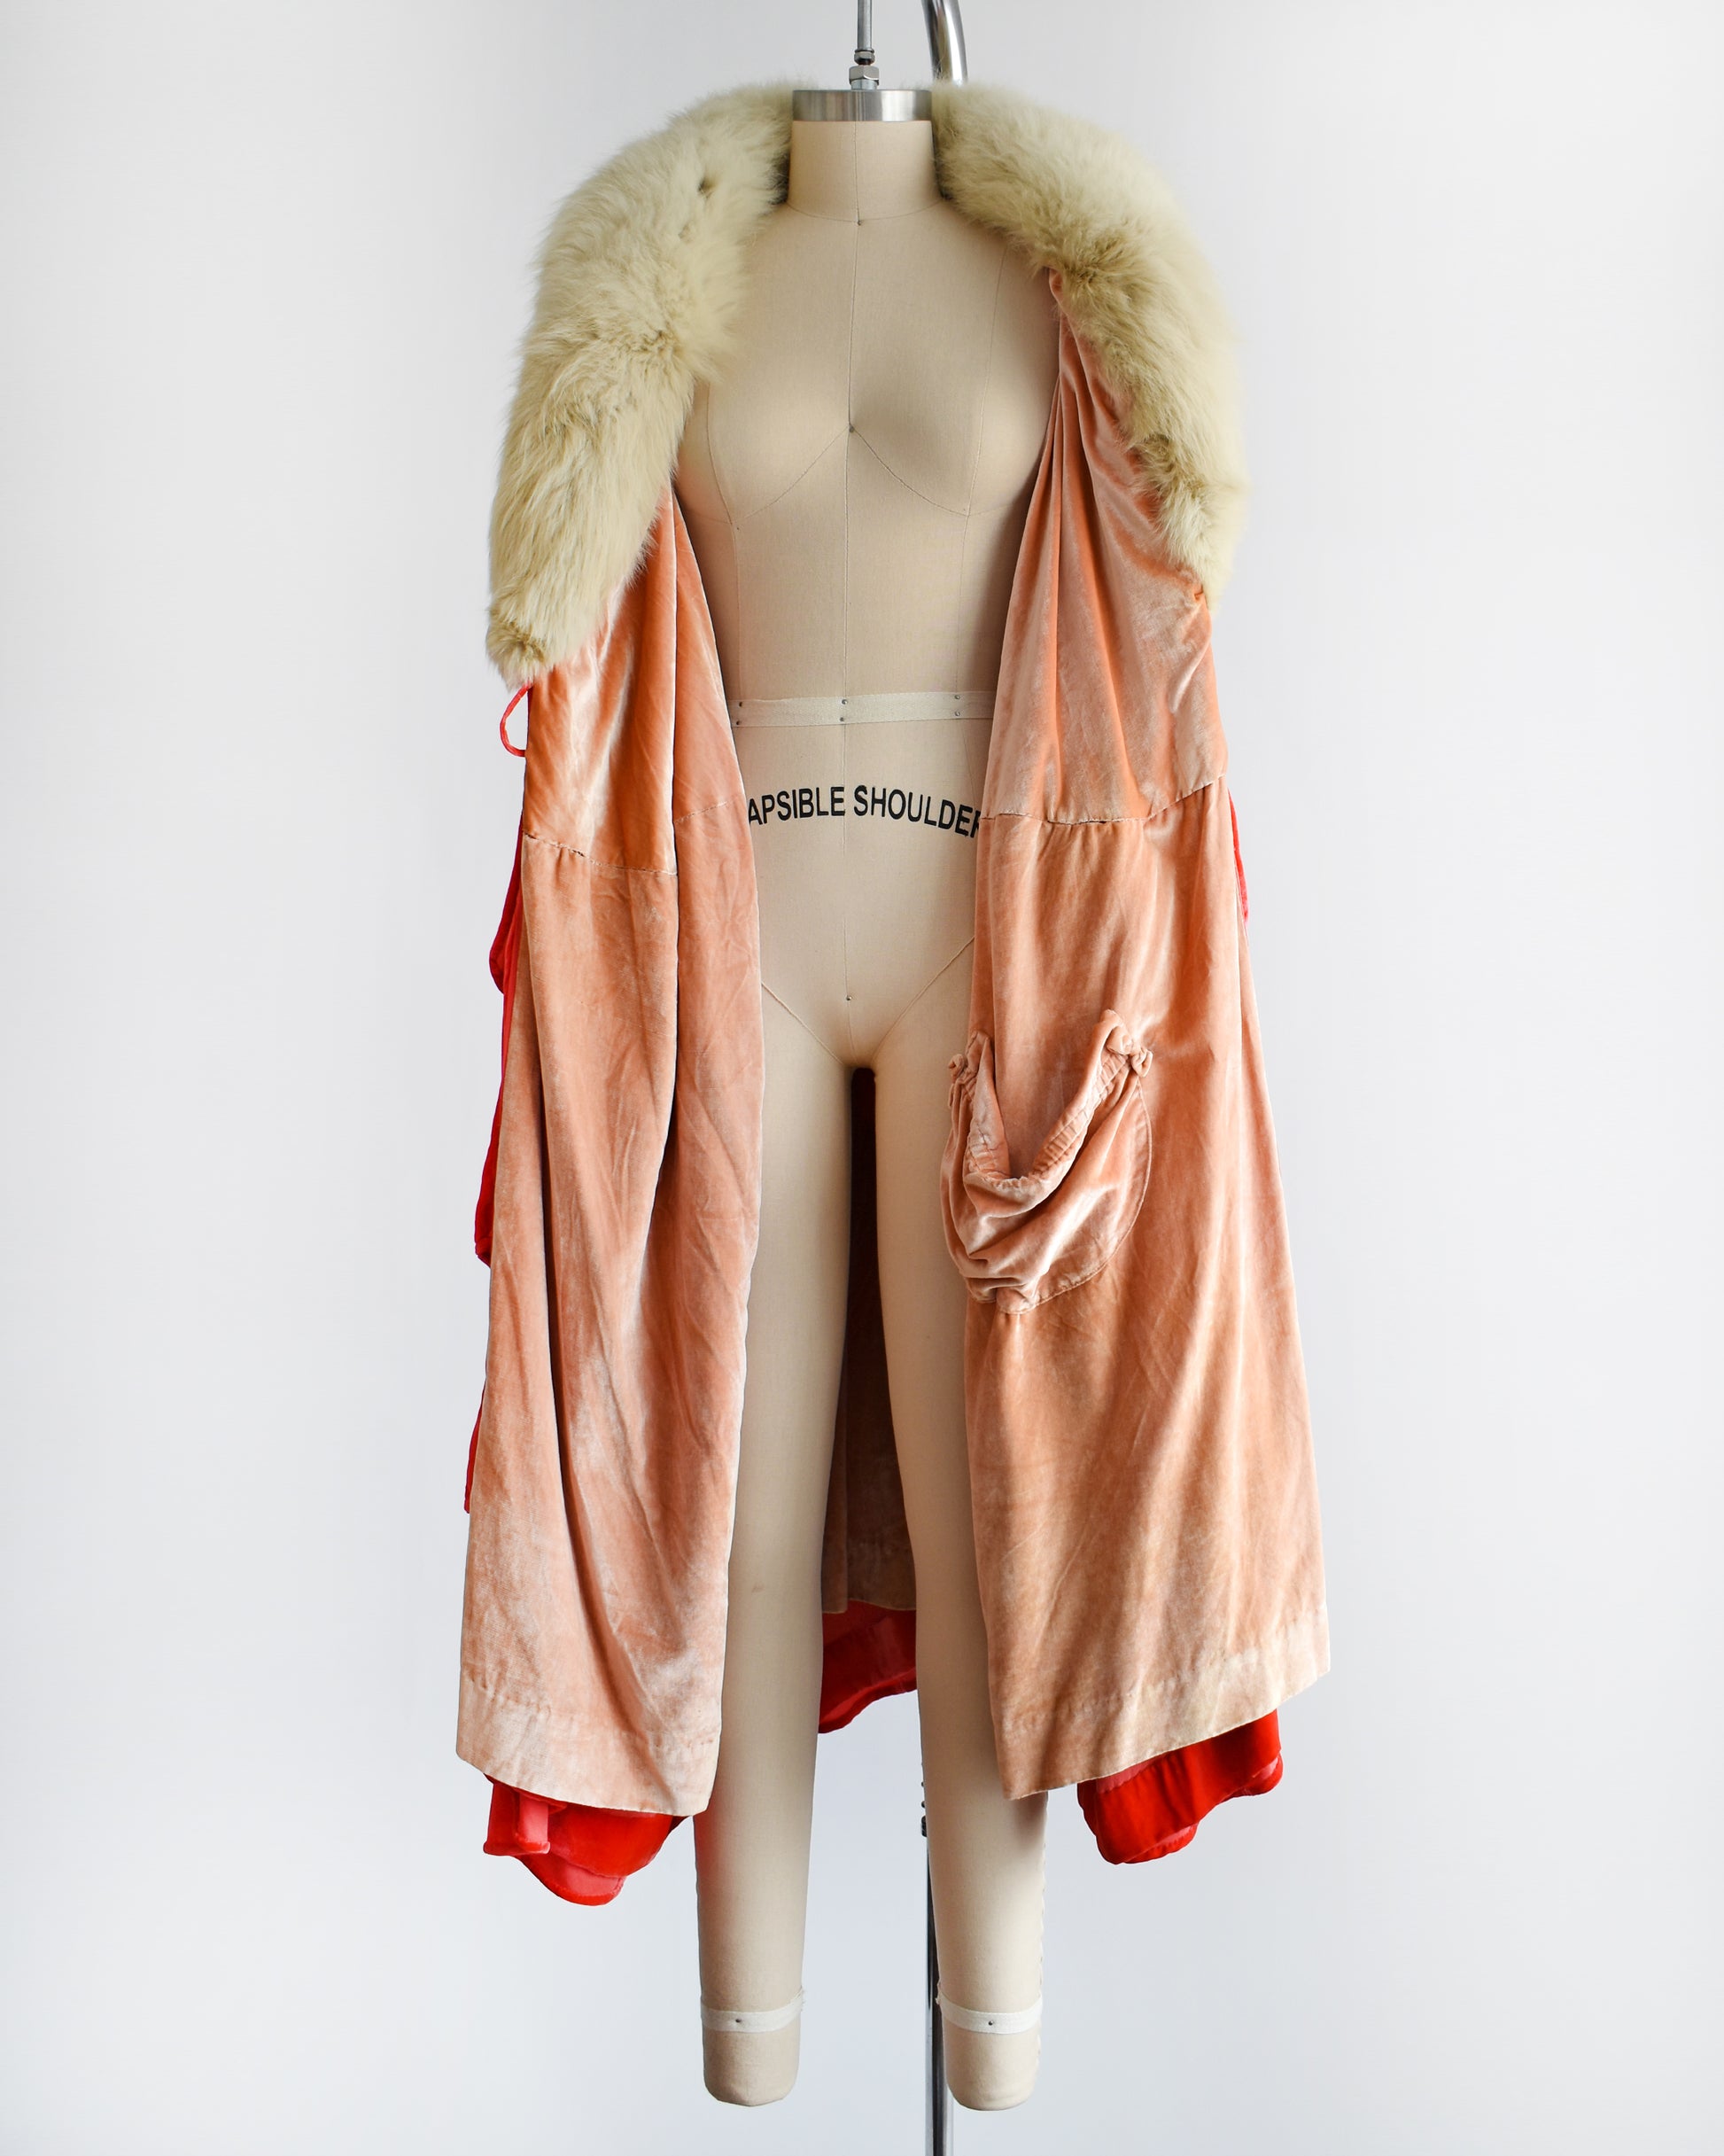 A vintage 1920s ruffled silk velvet opera coat with cream fox fur trim. The cape is open showing the peach lining and one of the inside pockets